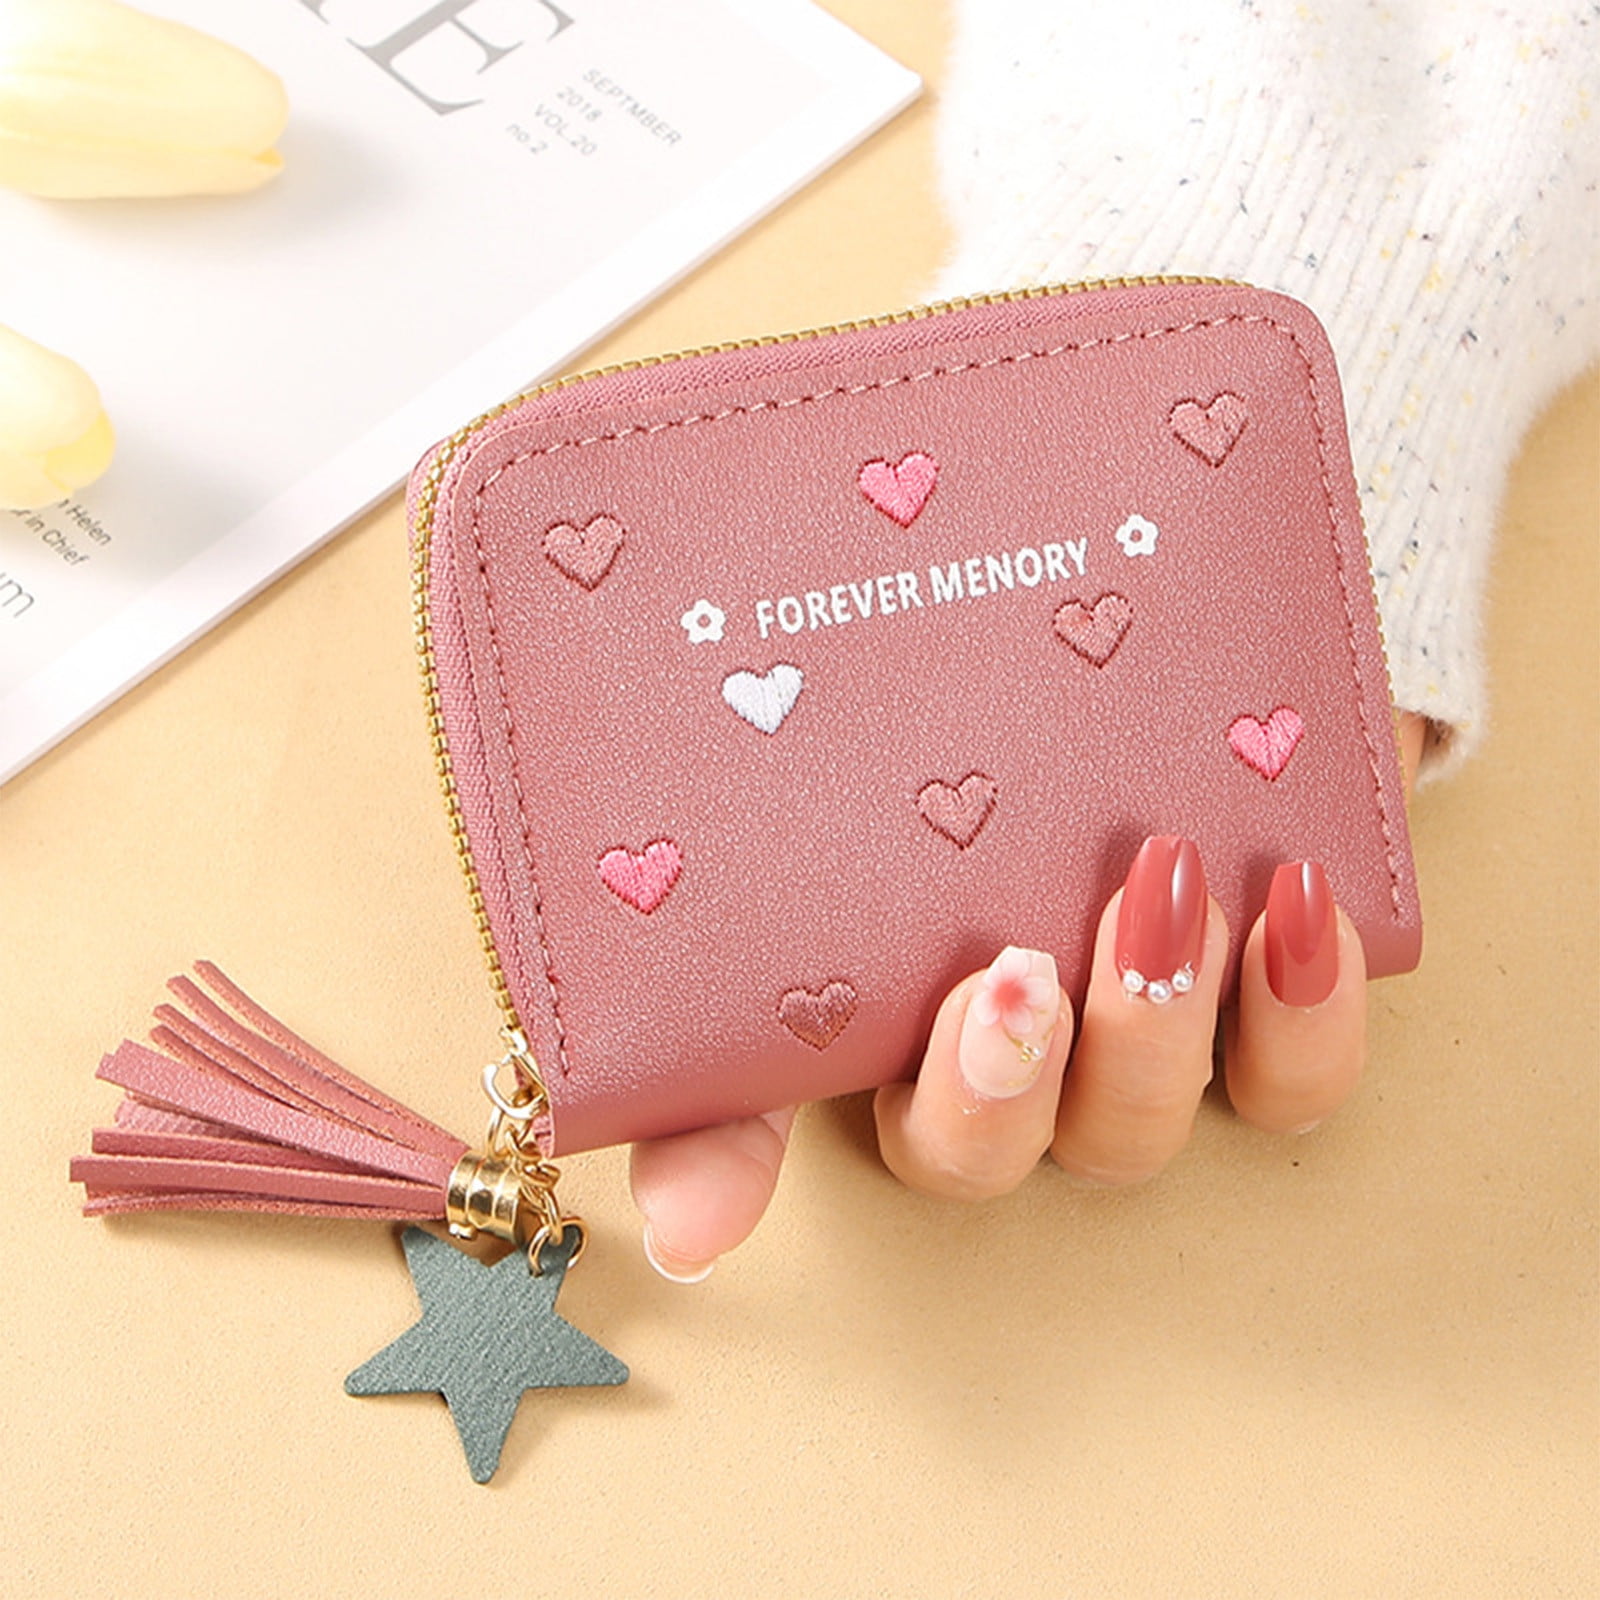 Mini Womens Crocodile Pattern Zipper Wristlet Wallet, Small Coin Purse,  Fashion PU Leather Ladies Card Holder Coin Bag From Migua55, $4.07 |  DHgate.Com